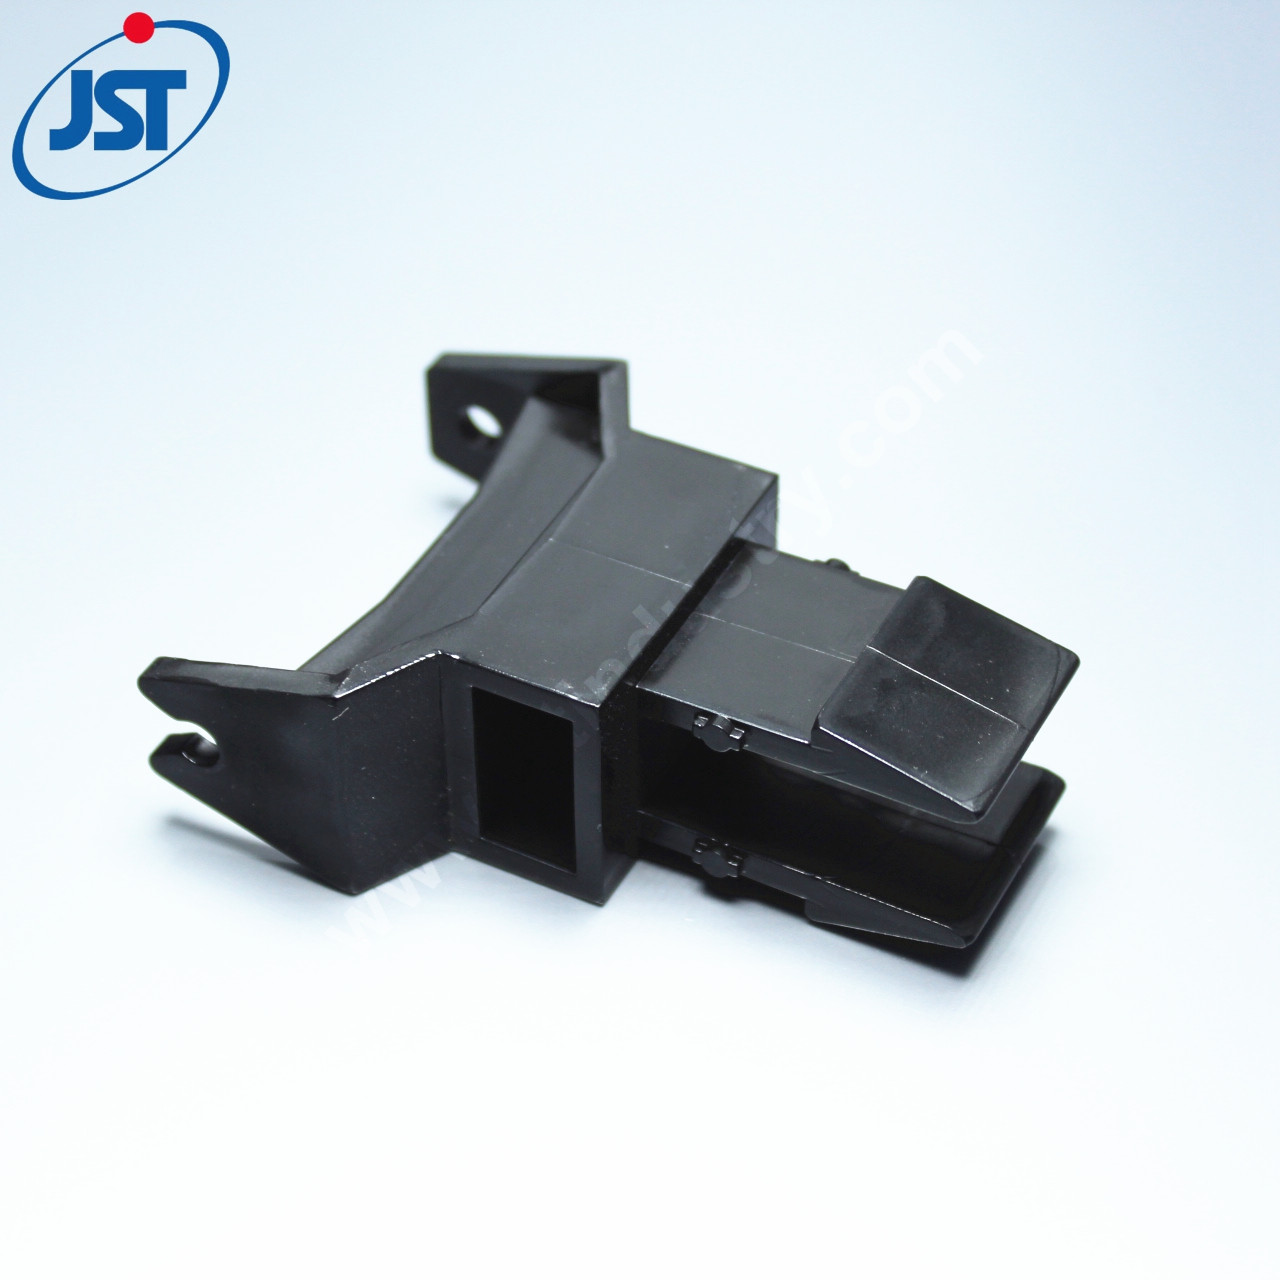 OEM Injection Molded Plastic PP Parts 